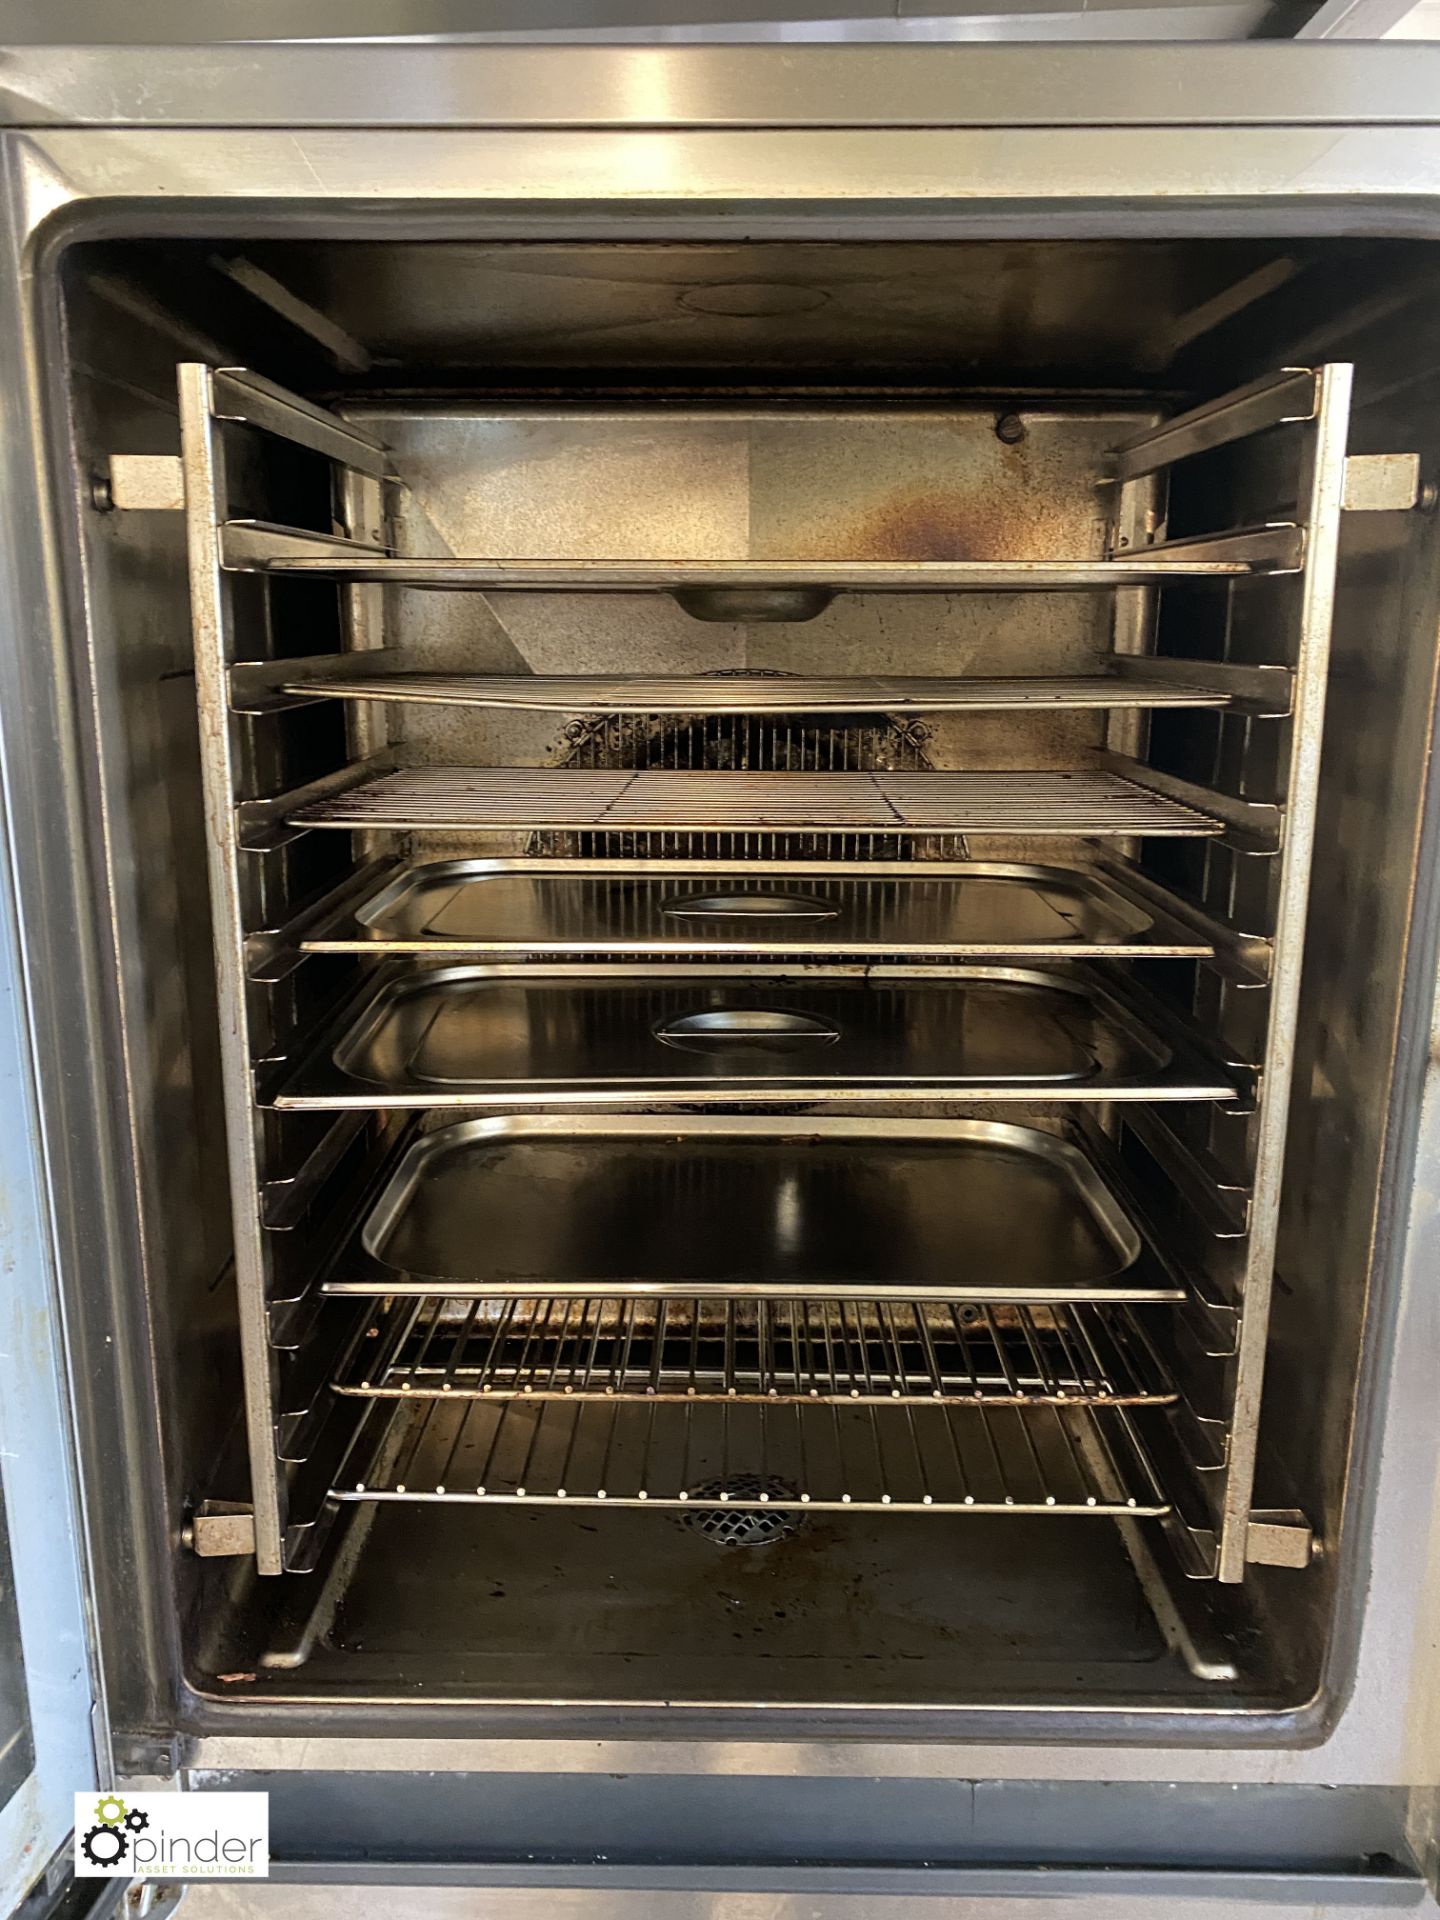 Lainox HME101P Combi Oven, 1000mm wide x 860mm deep x 1100mm high, 400volts, with stainless steel - Image 5 of 8